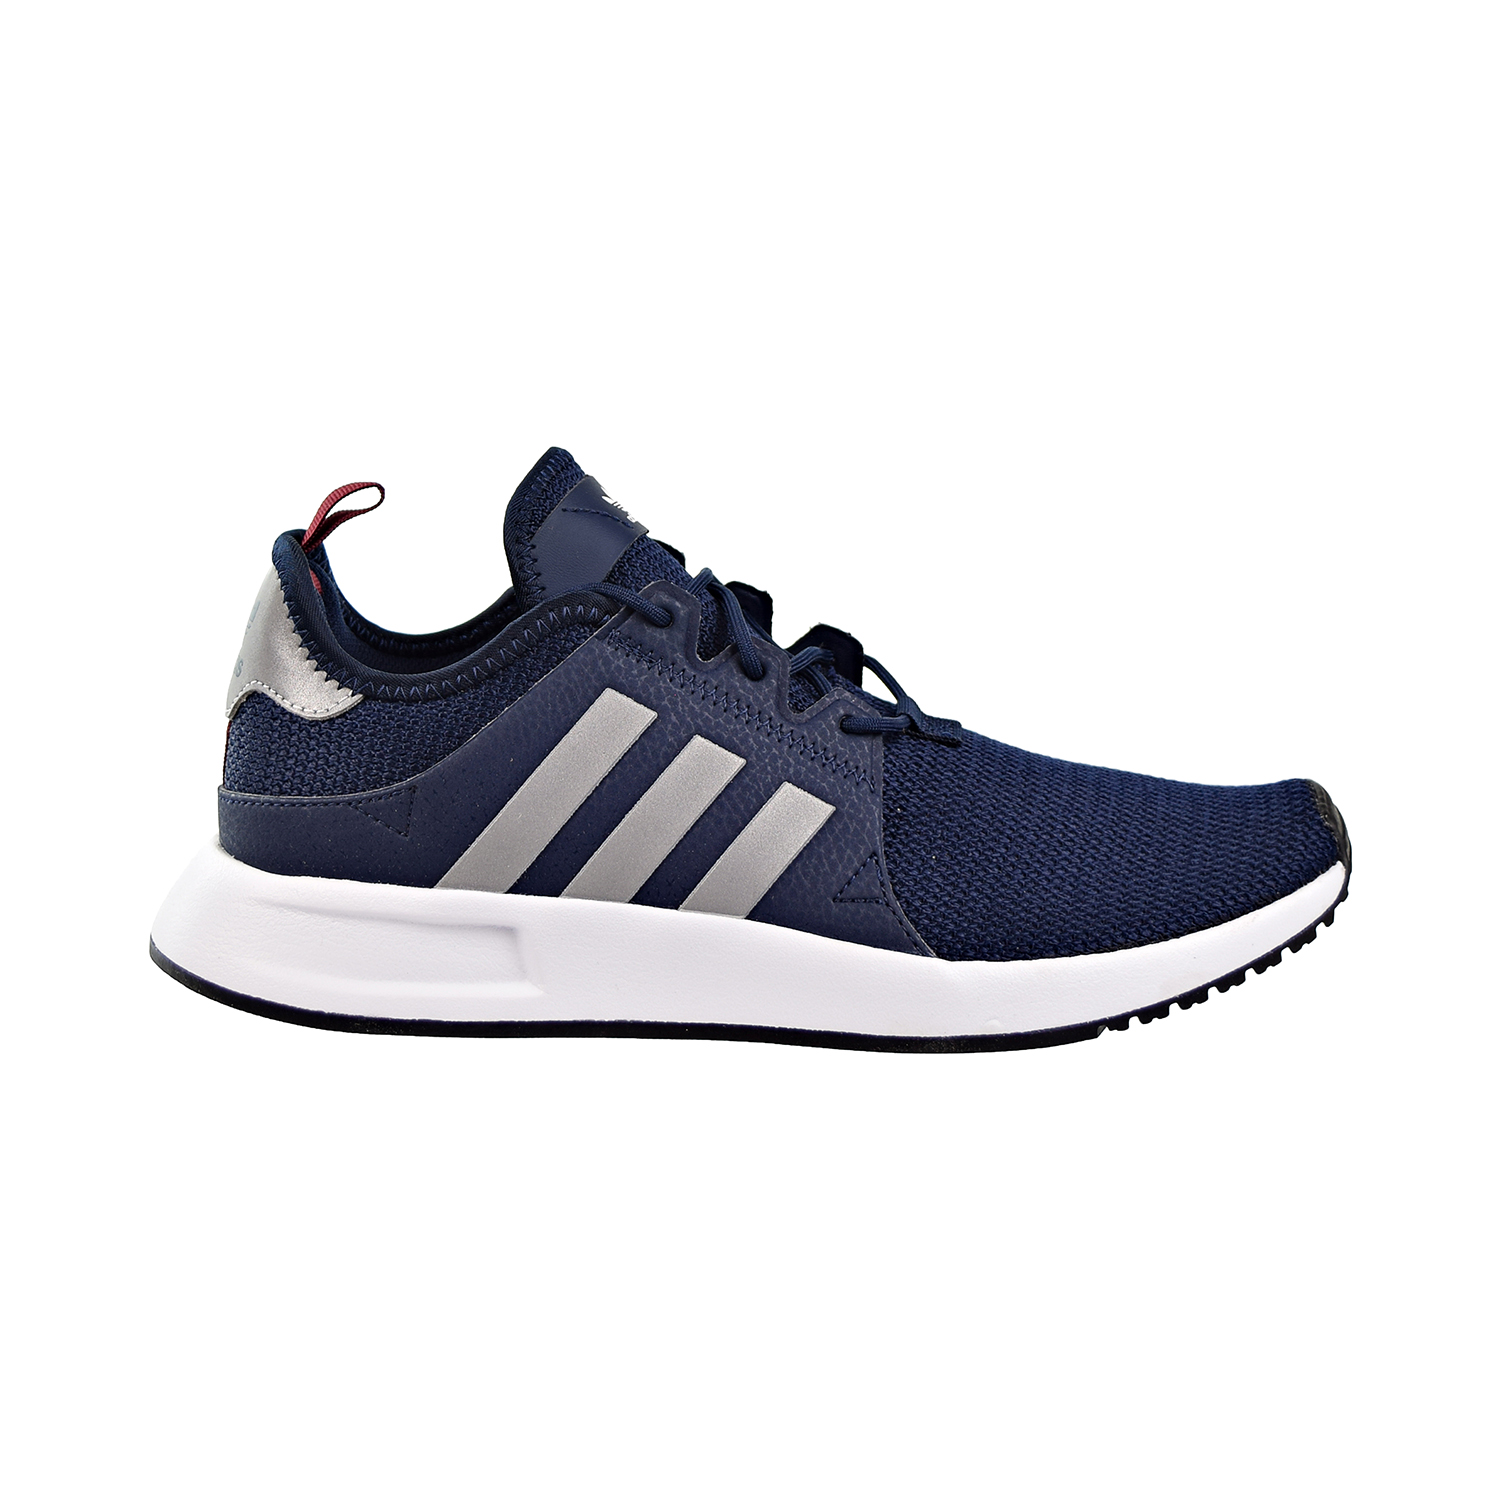 adidas mens shoes new arrival